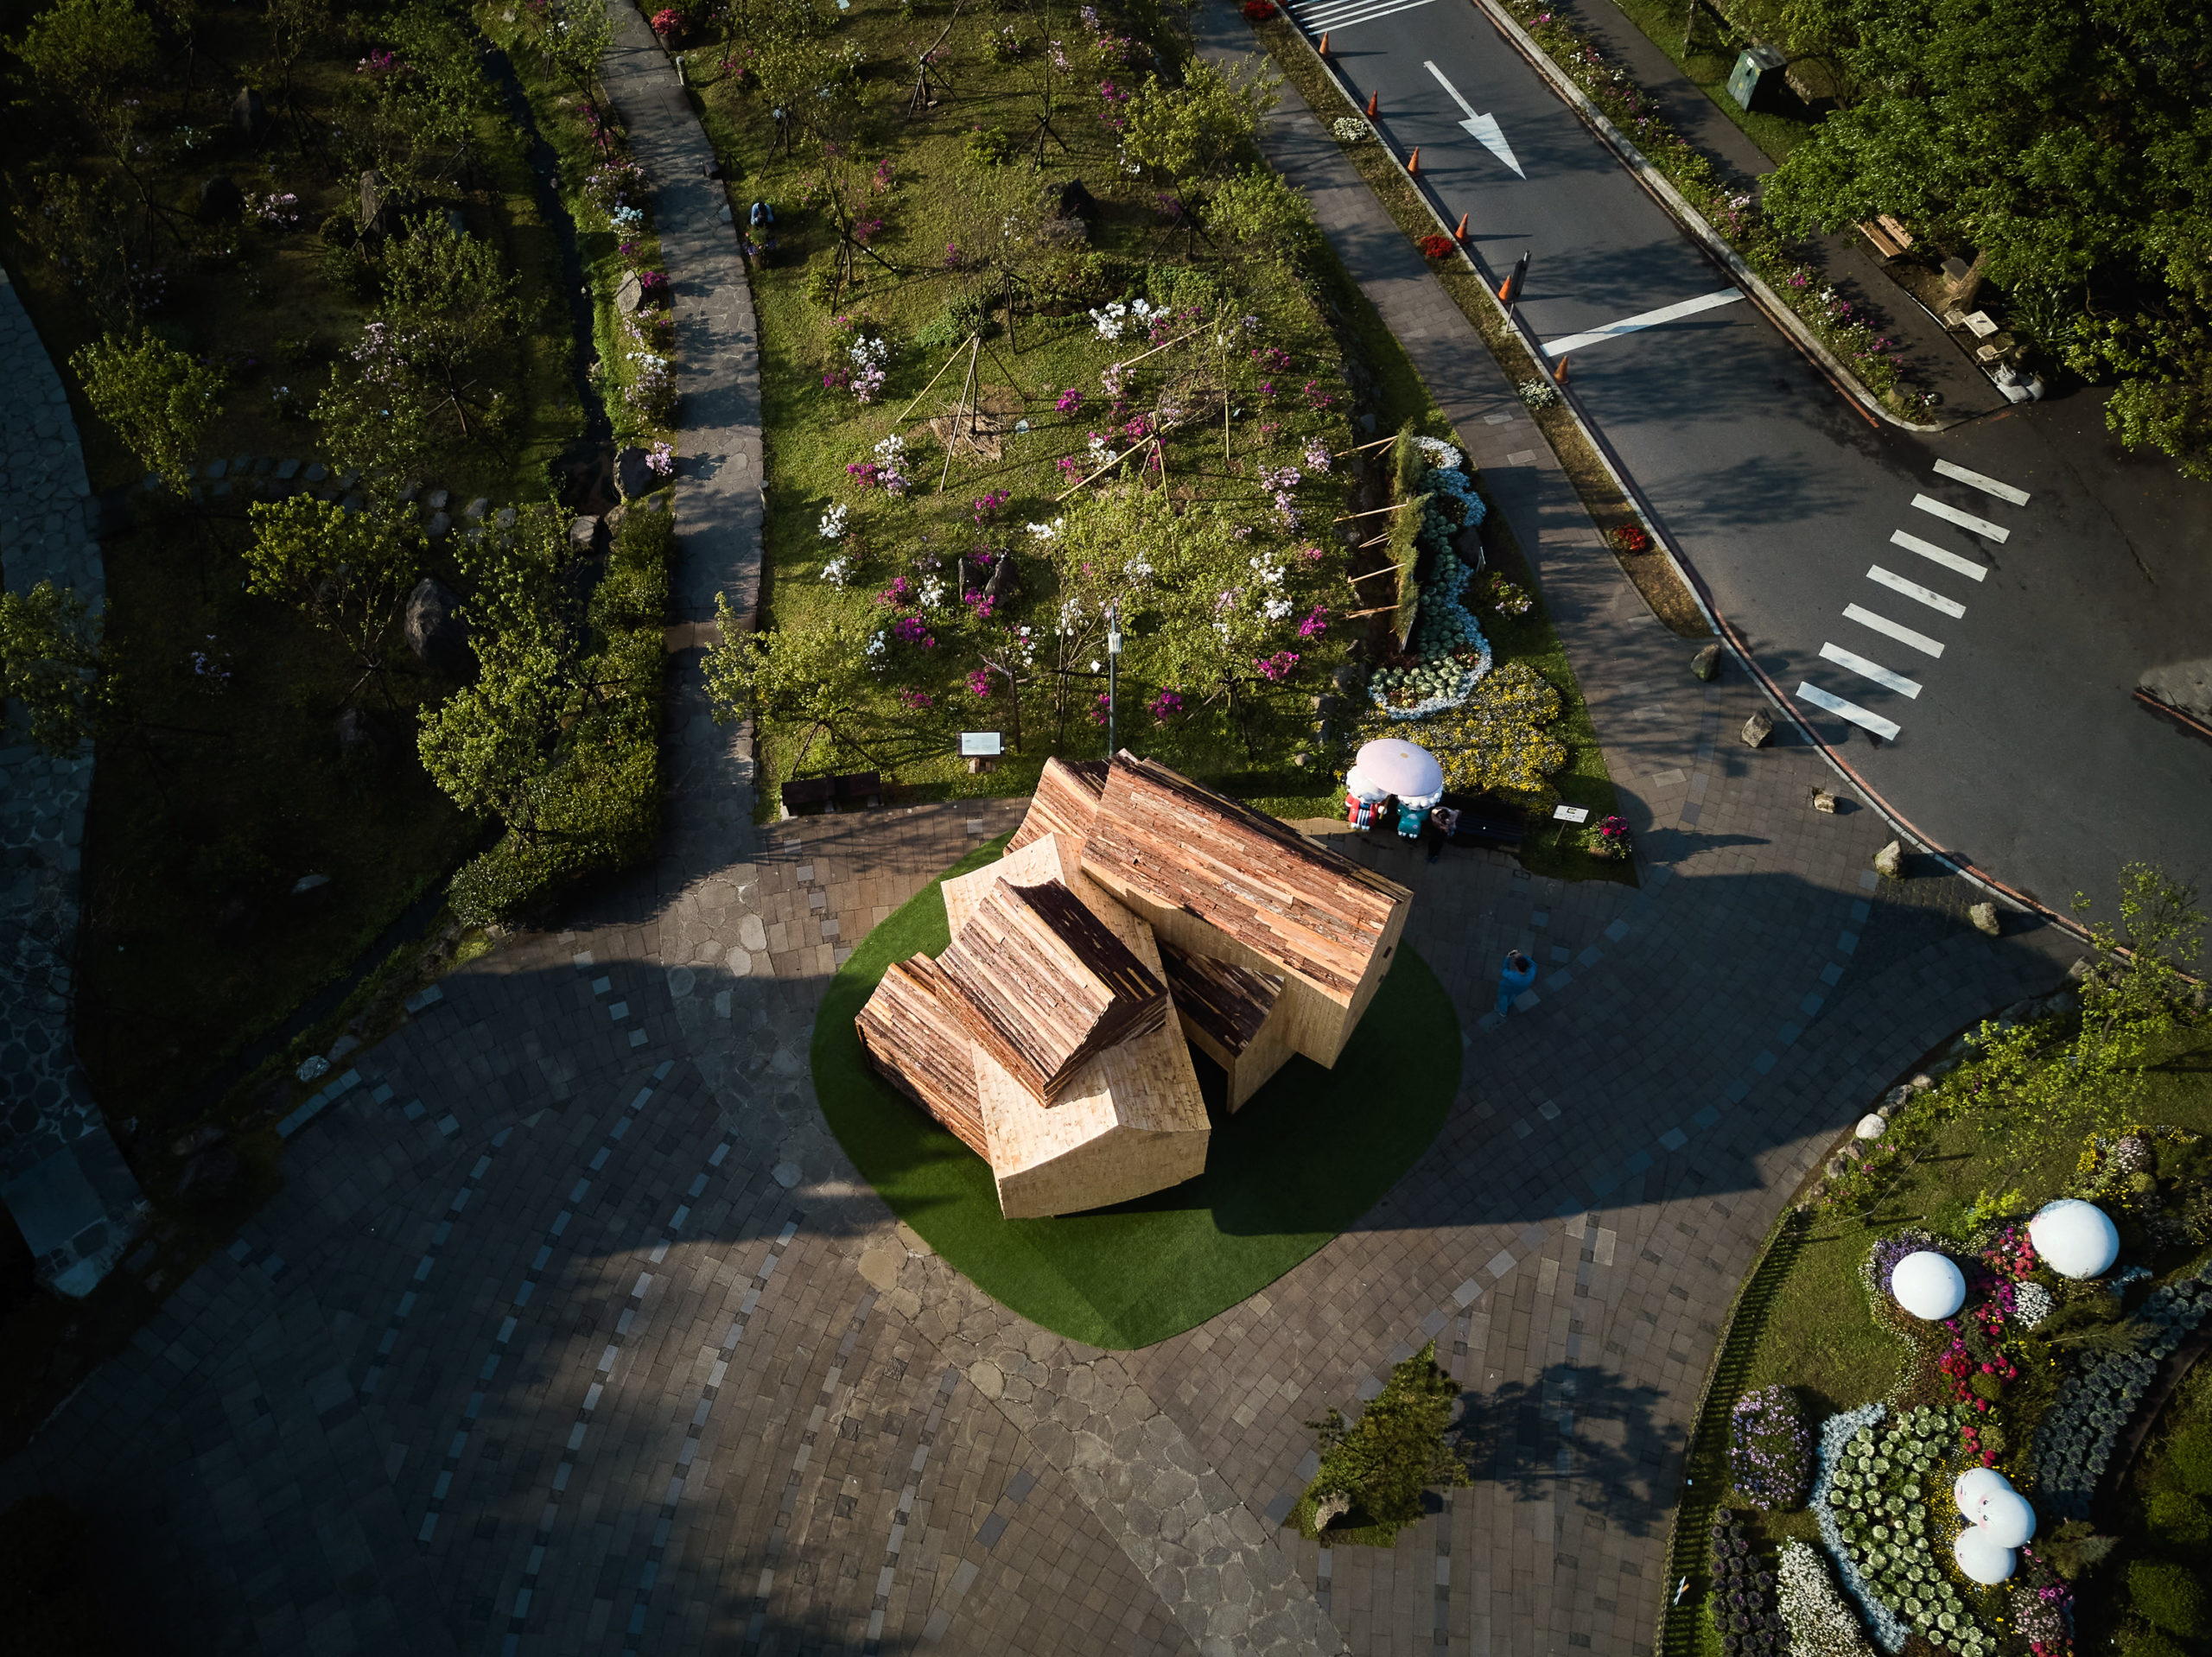 Boolean Birdhouse by Phoebe Says Wow Architects / PSW建築設計研究室